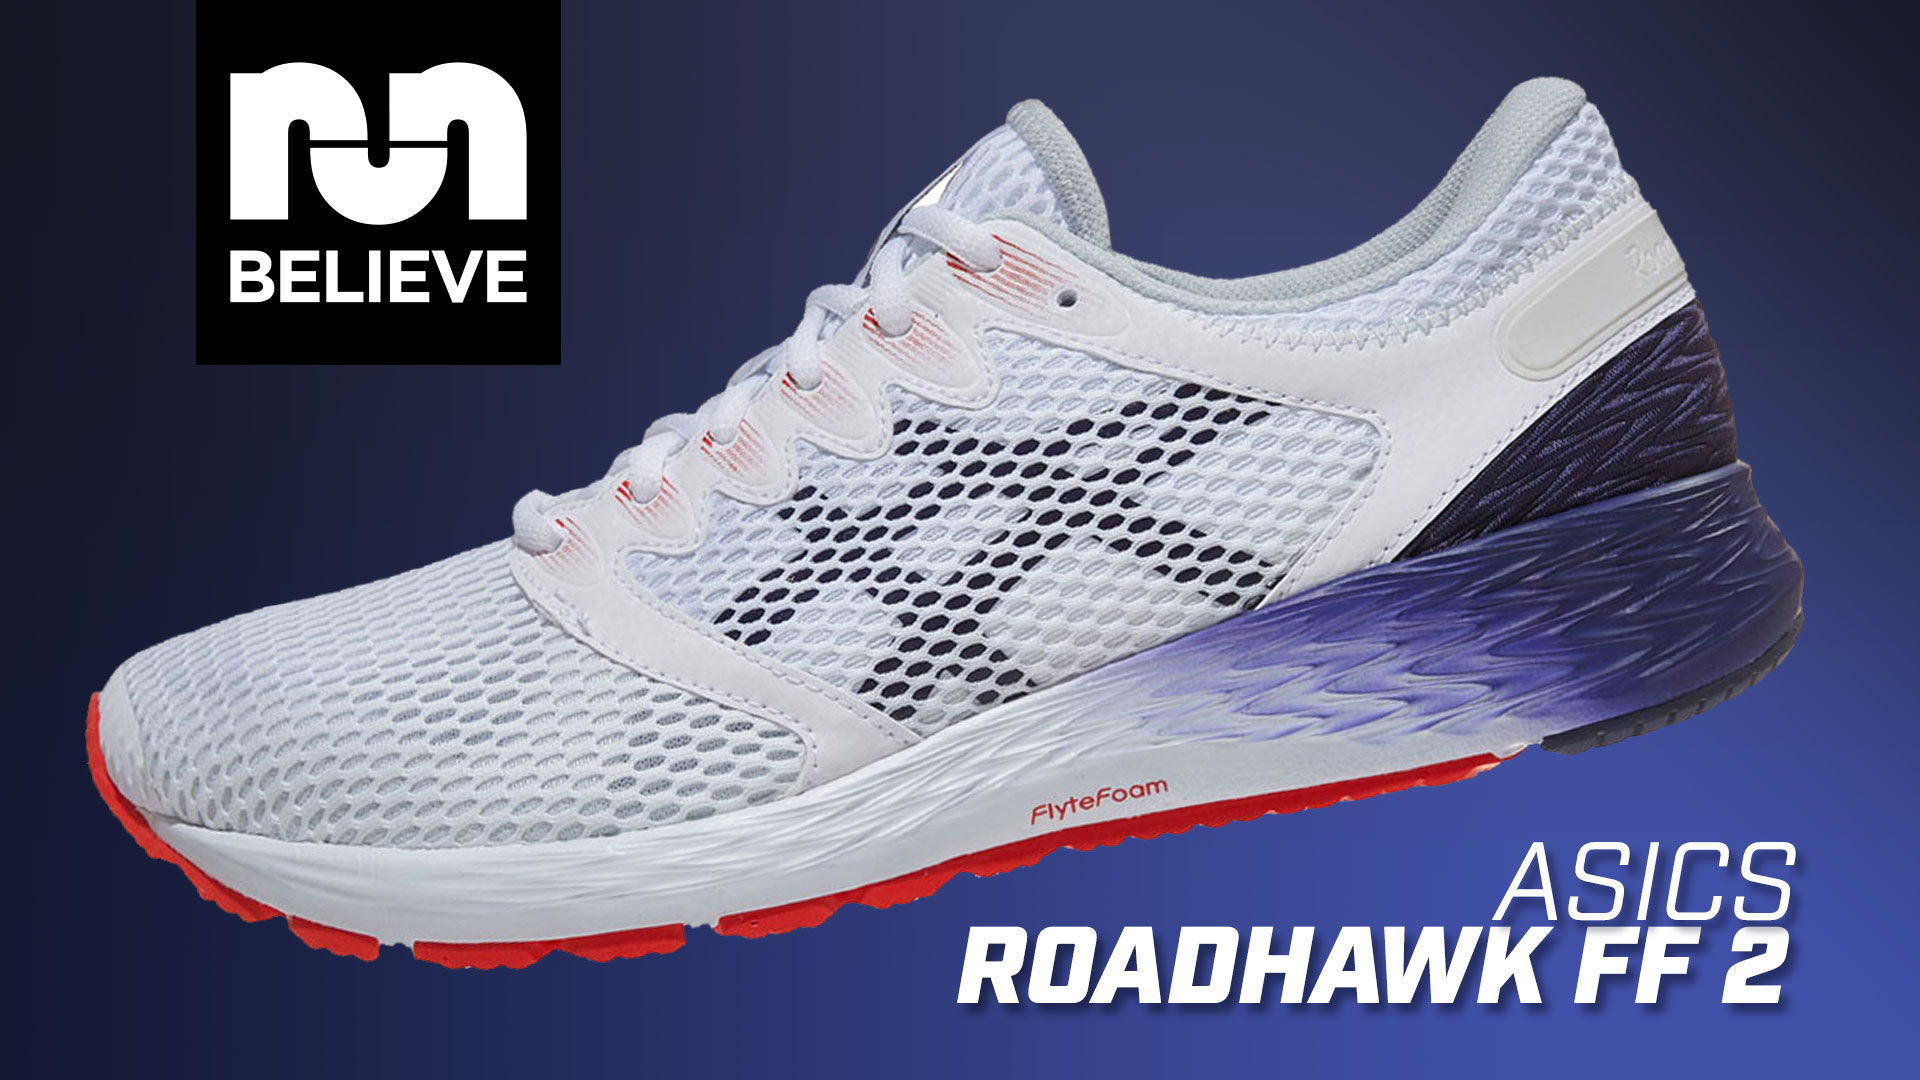 ASICS Roadhawk FF 2 Video Performance Review - Believe in the Run